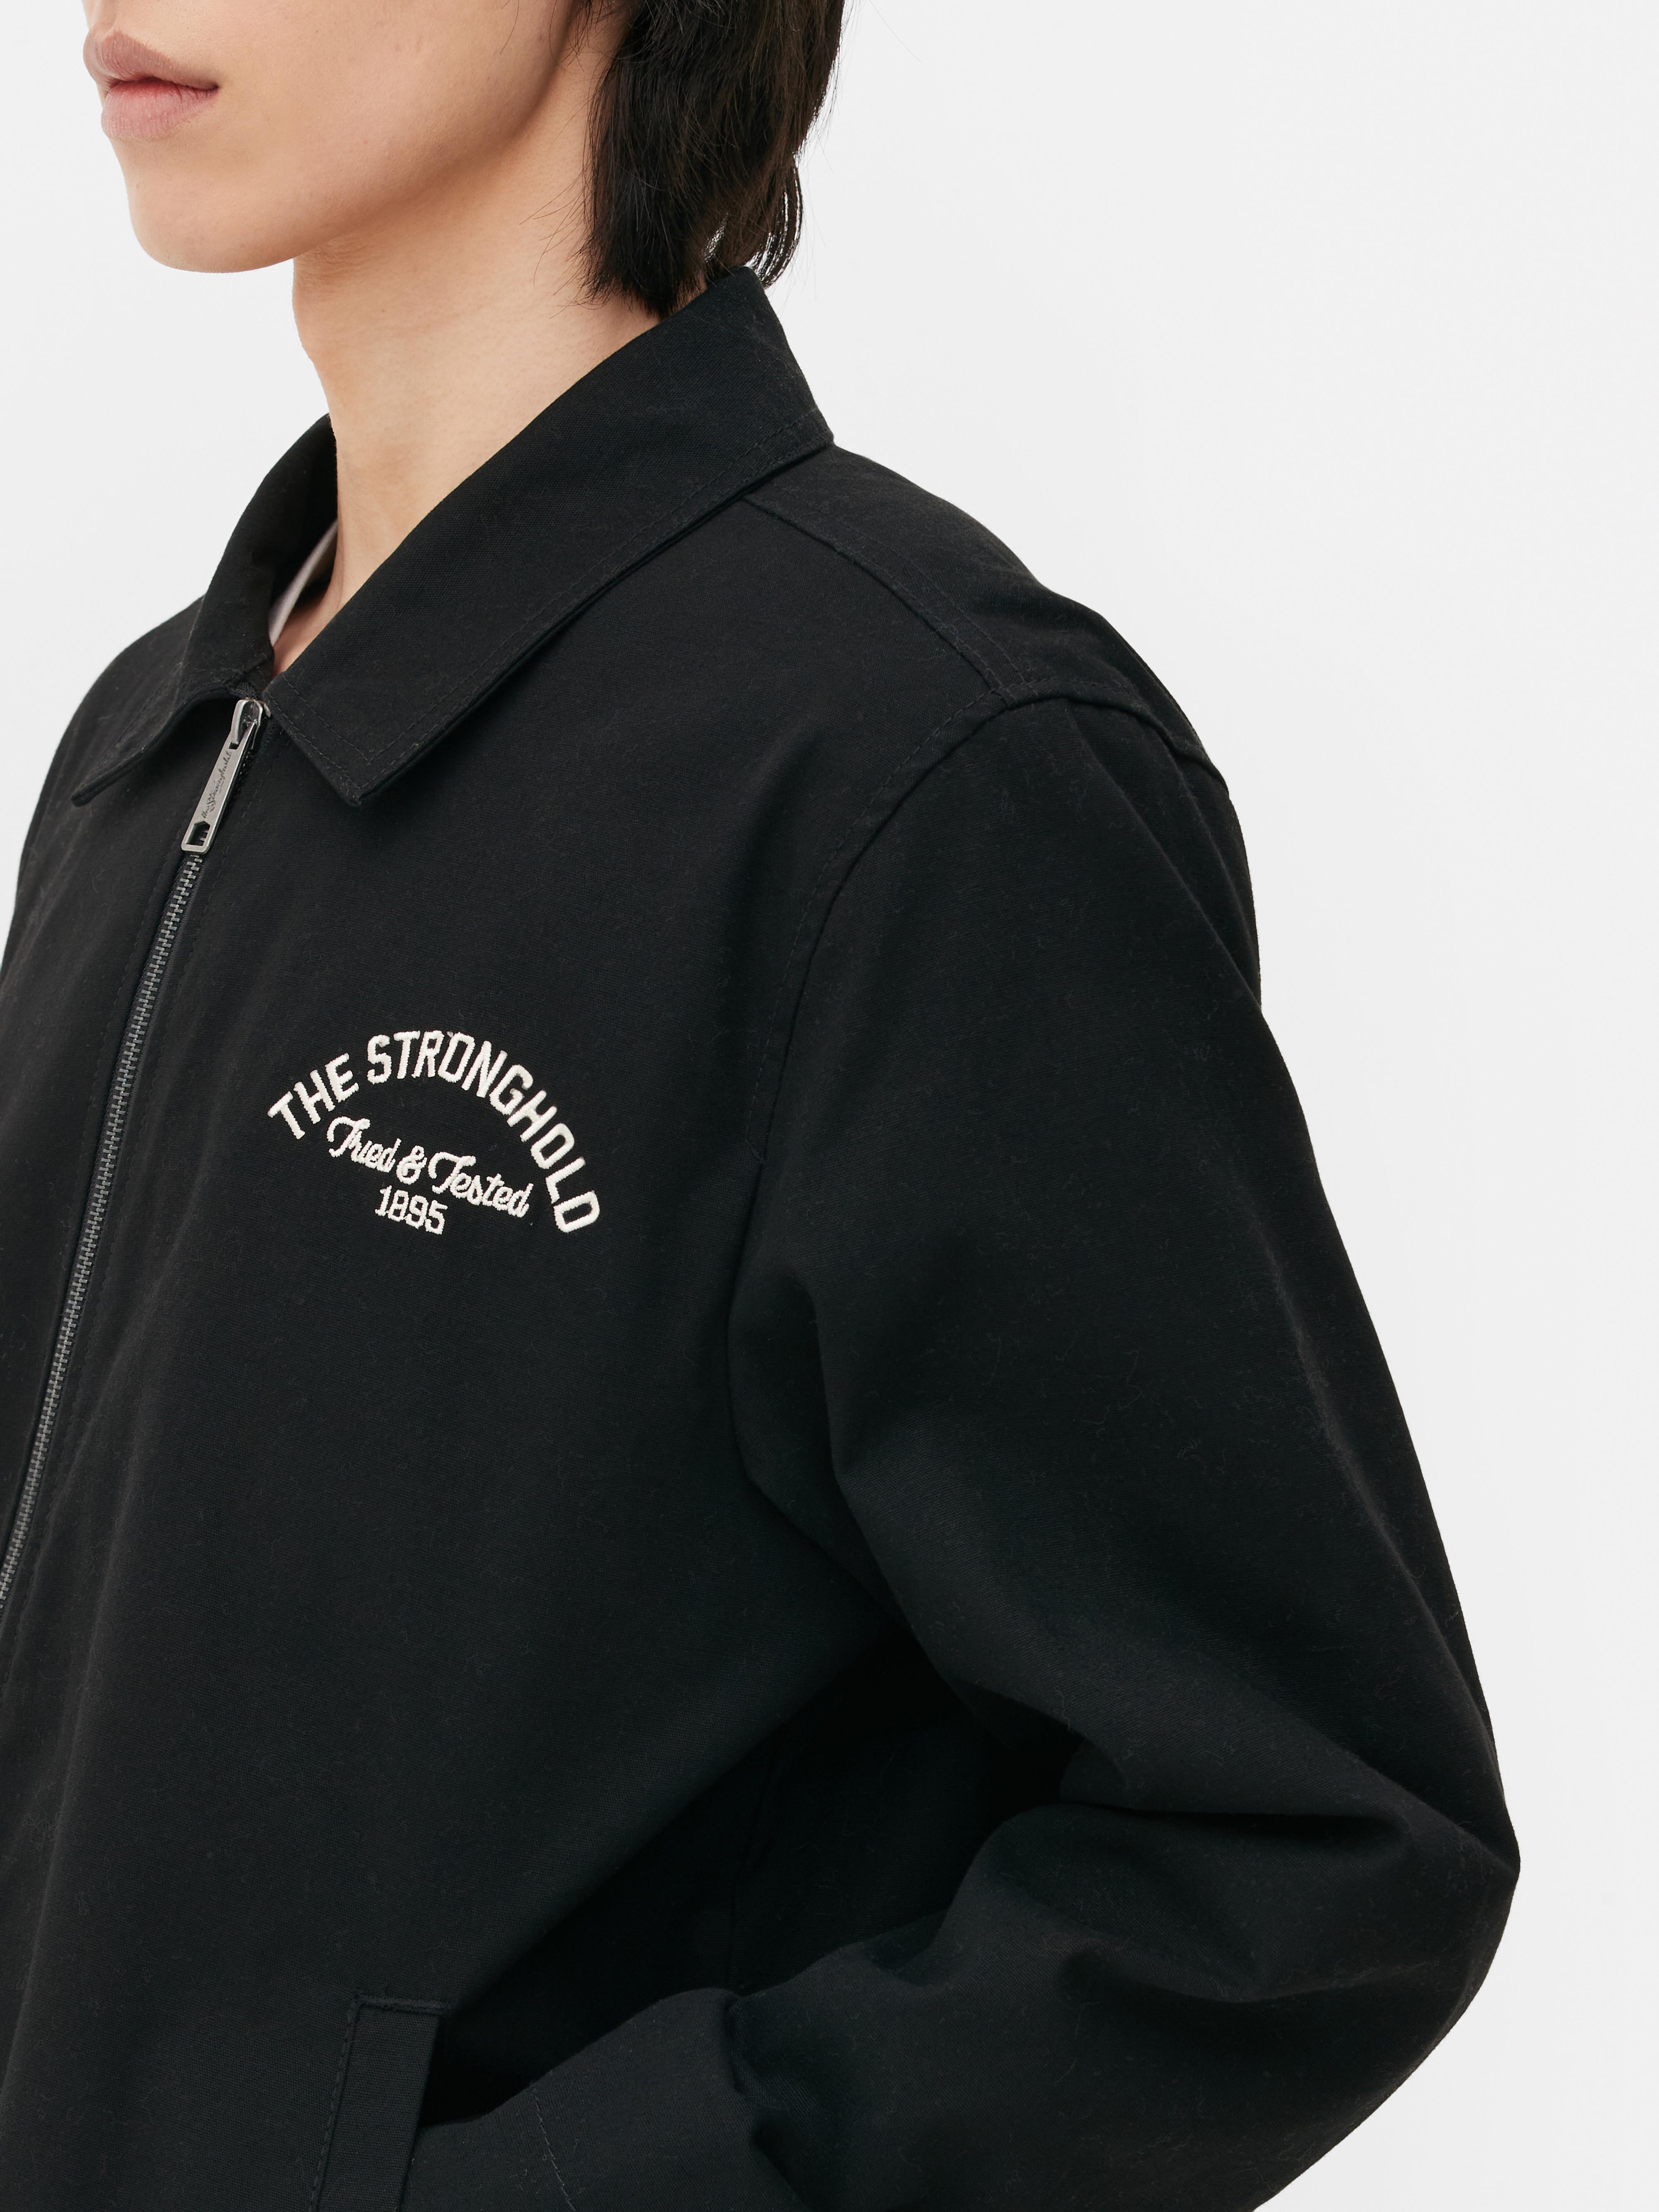 The Stronghold Embroidered Tiger Jacket